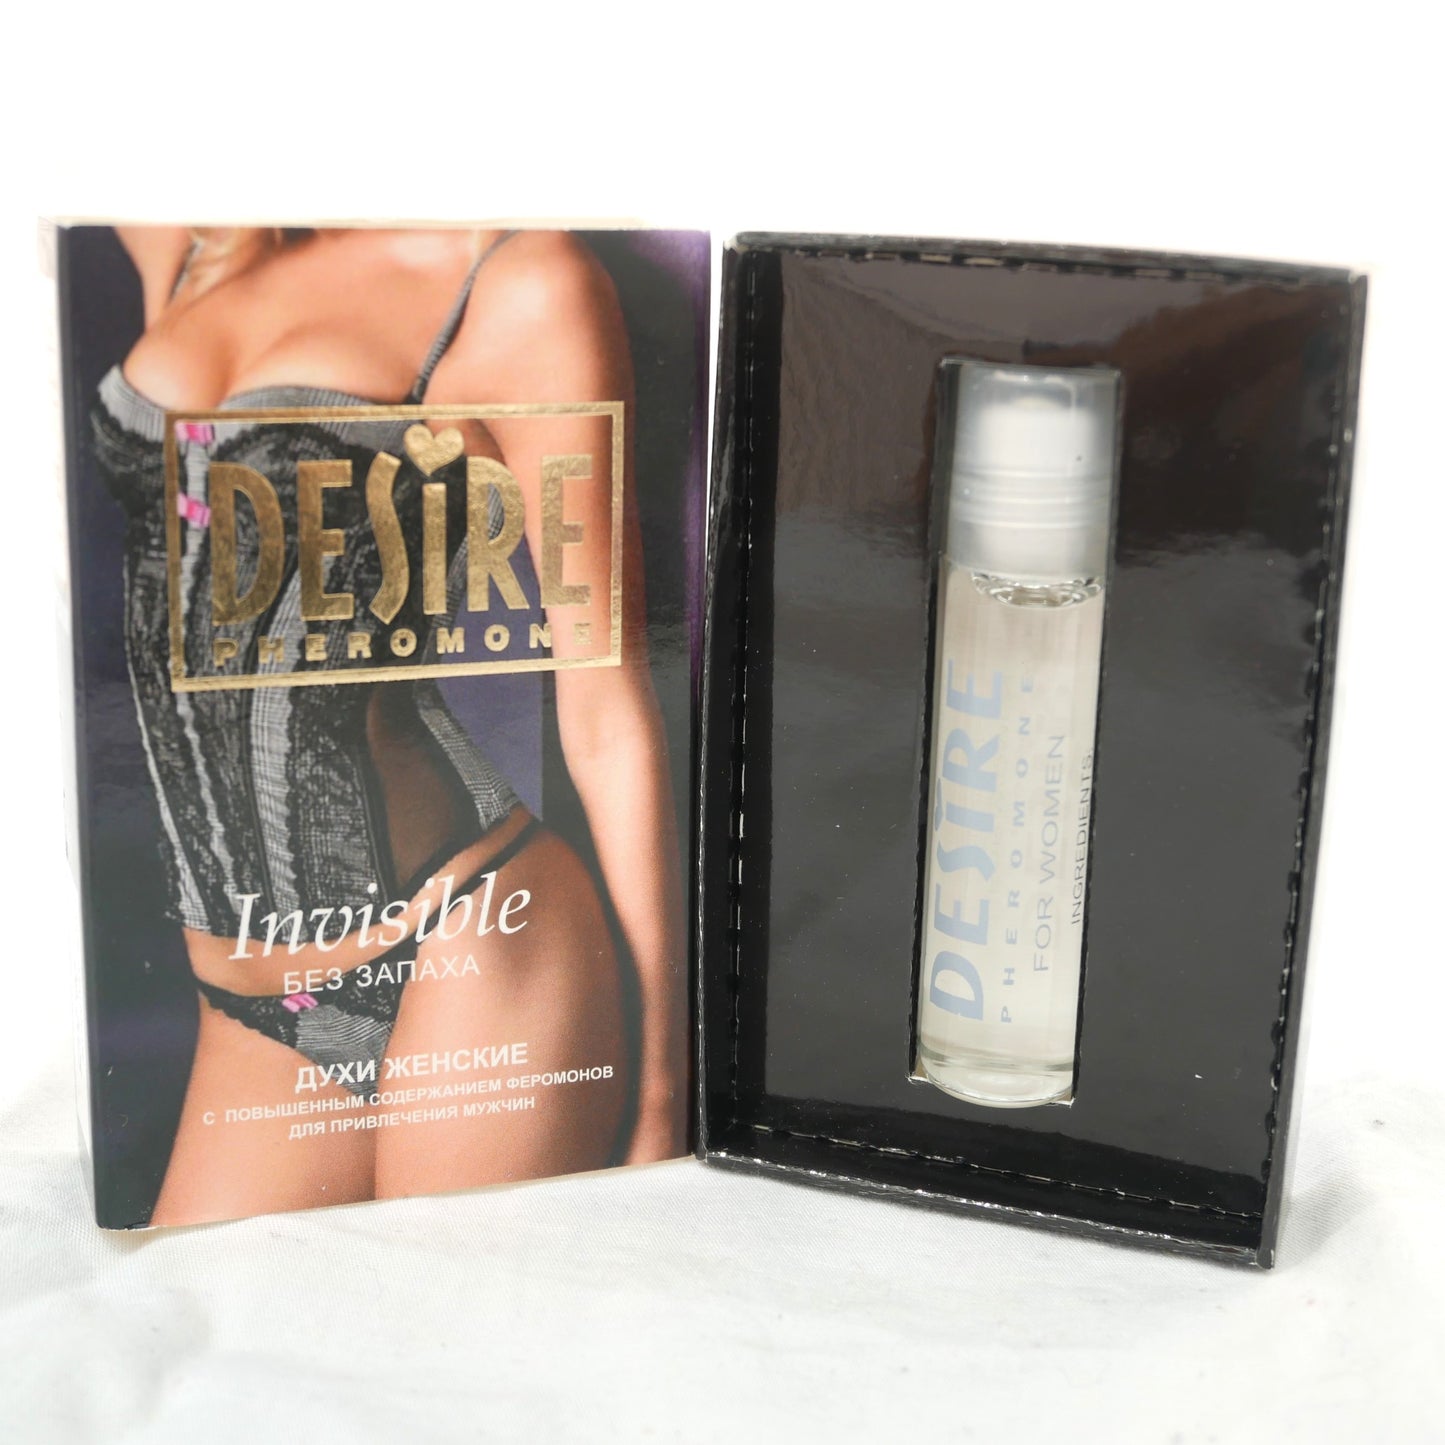 INVISIBLE Desire Pheromone without fragance for women to attract men 5ml / 0.17 oz